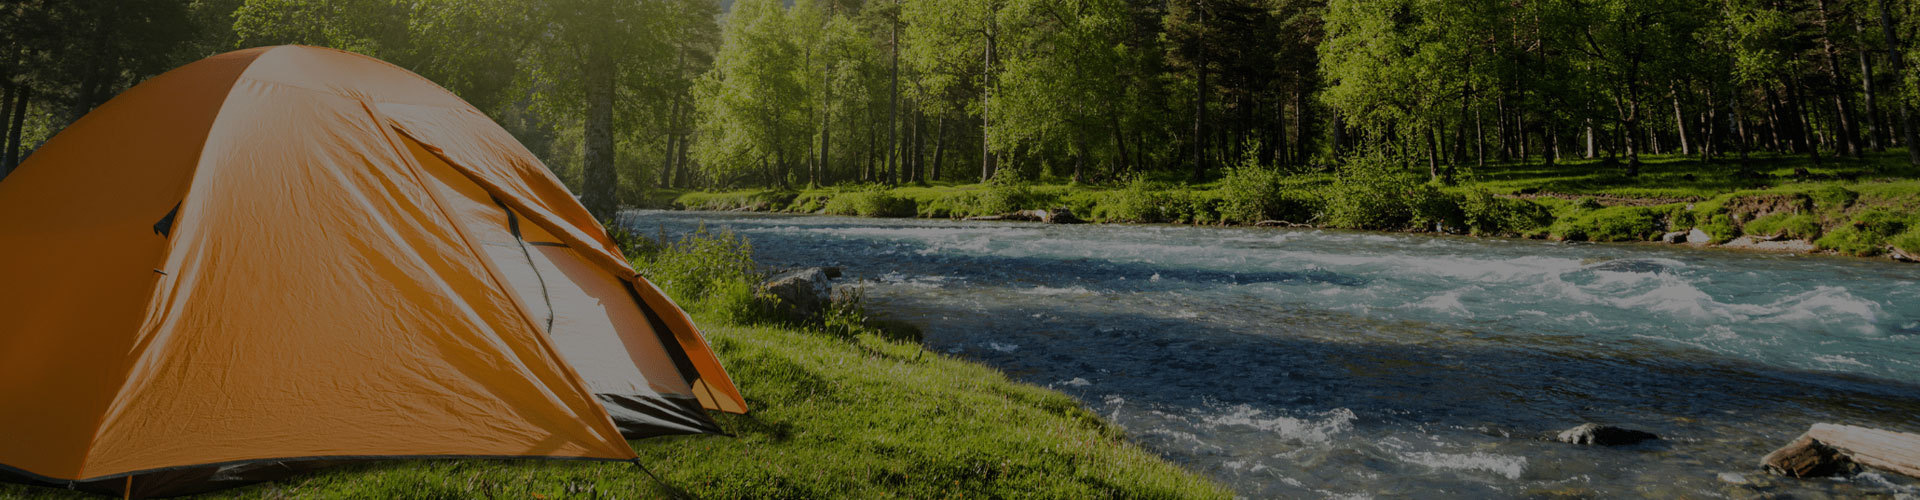 Camping Tents & Sleeping Bags Purchasing Agent